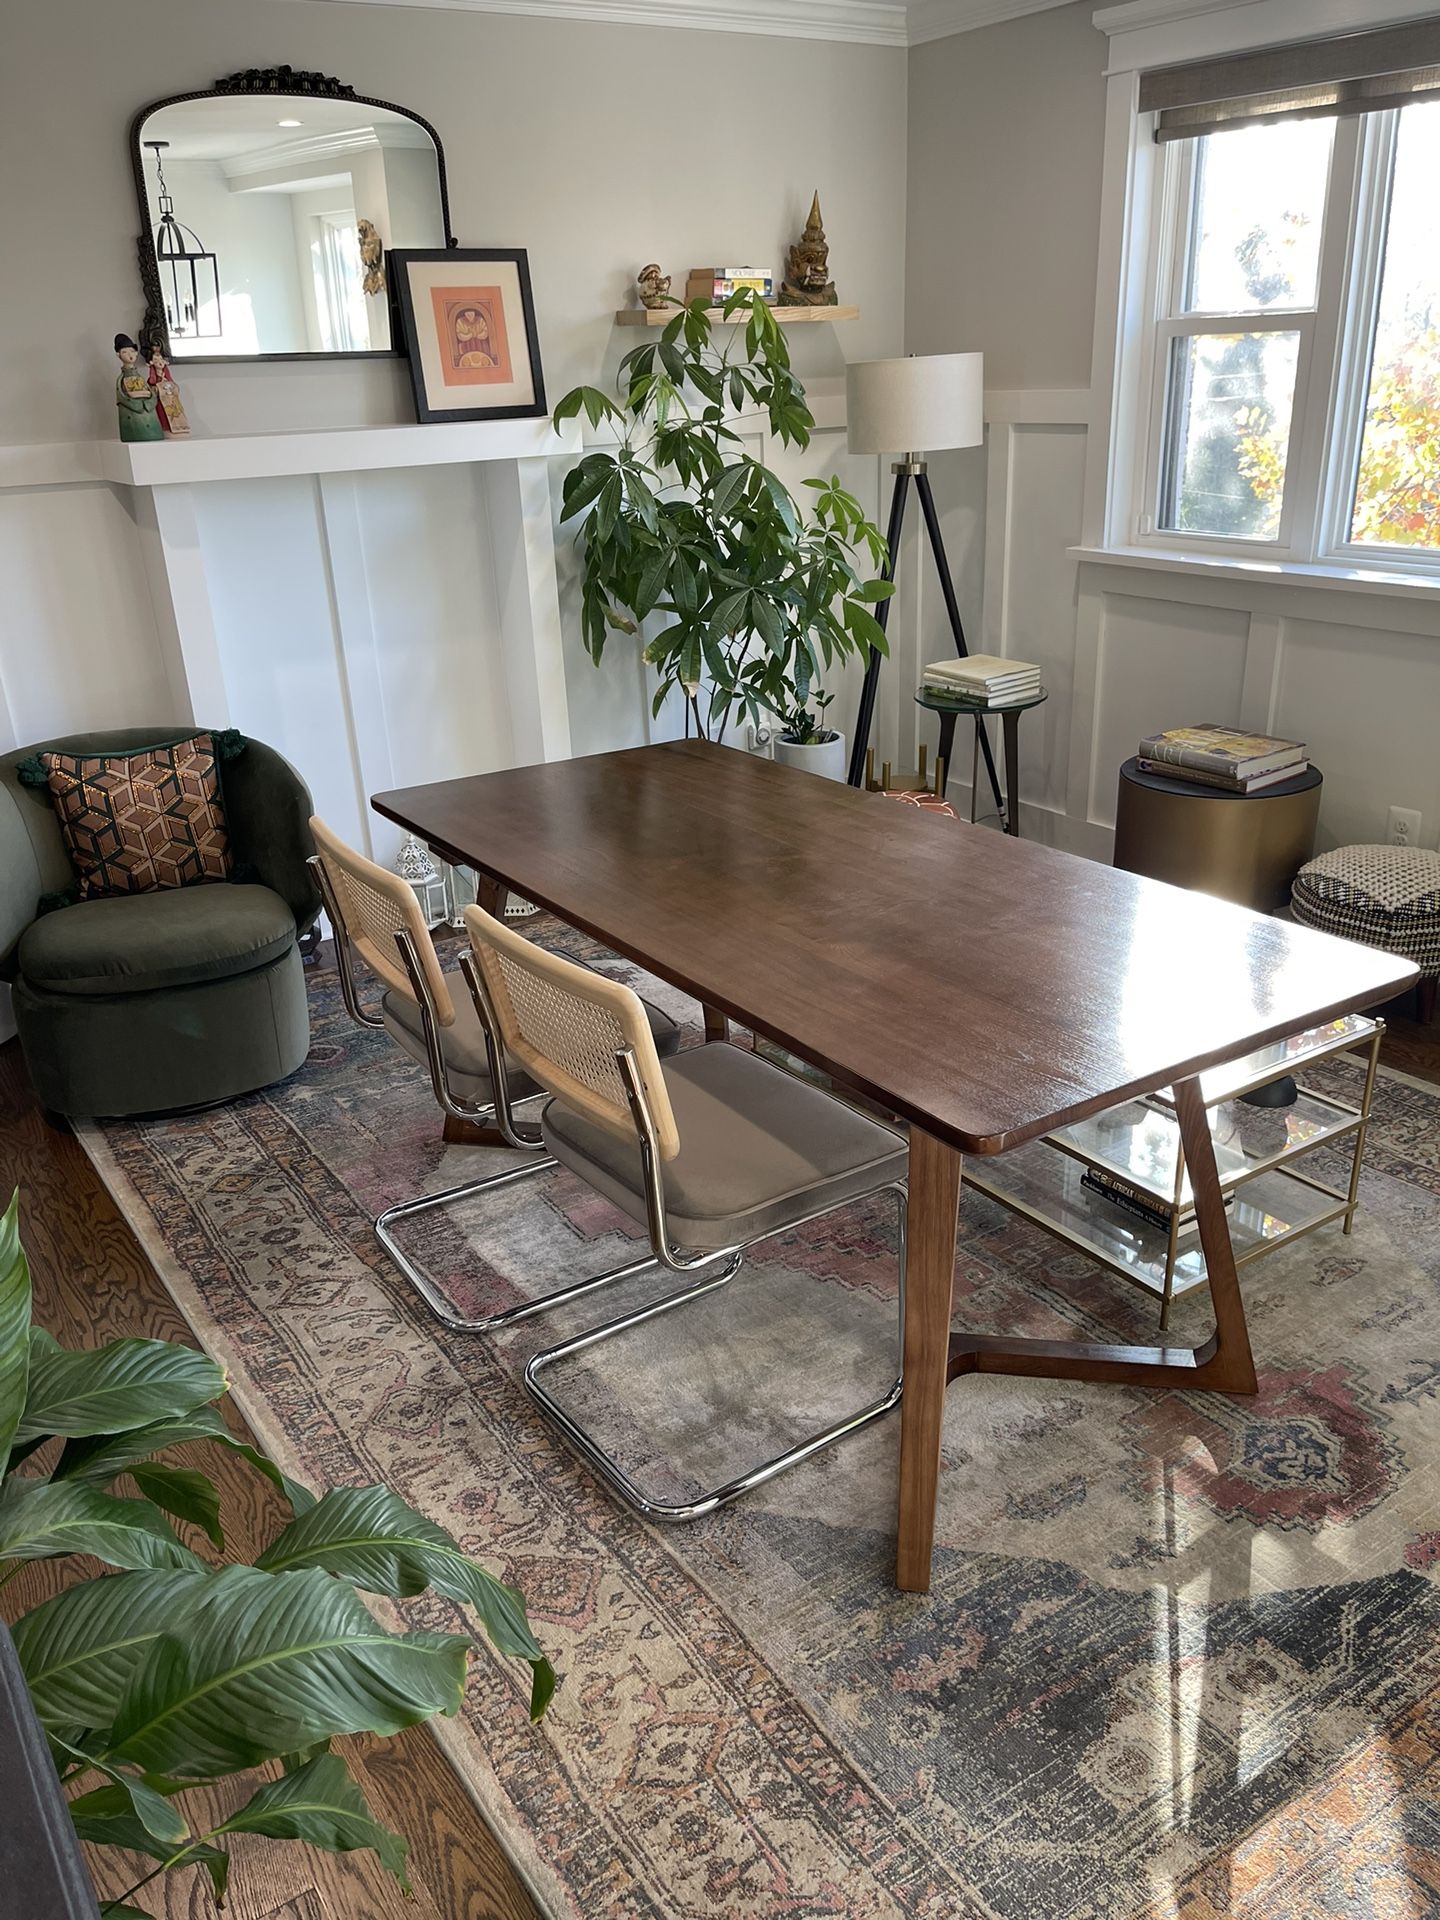 BRAND NEW TABLE! (bought in October) Chairs not included